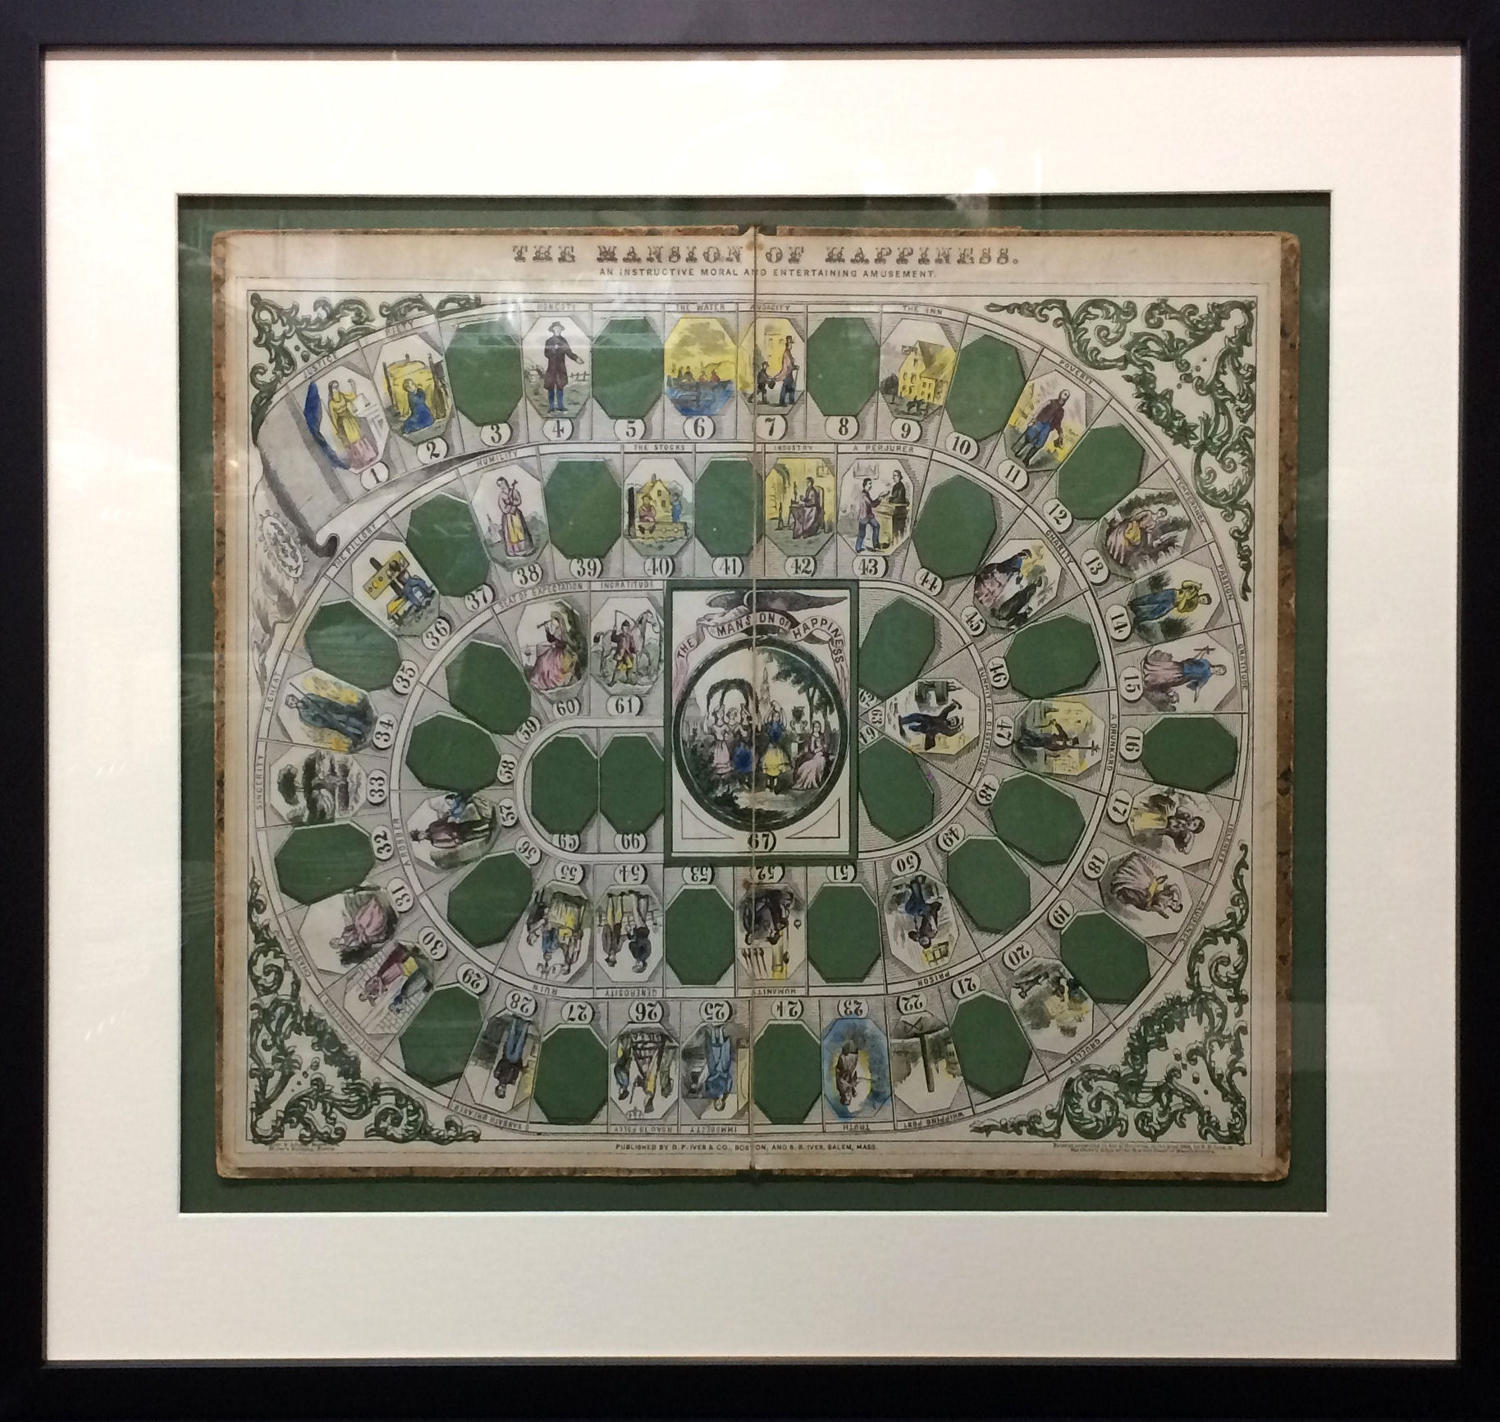 Professionally Framed Game Board ~ Mansion of Happiness 1864